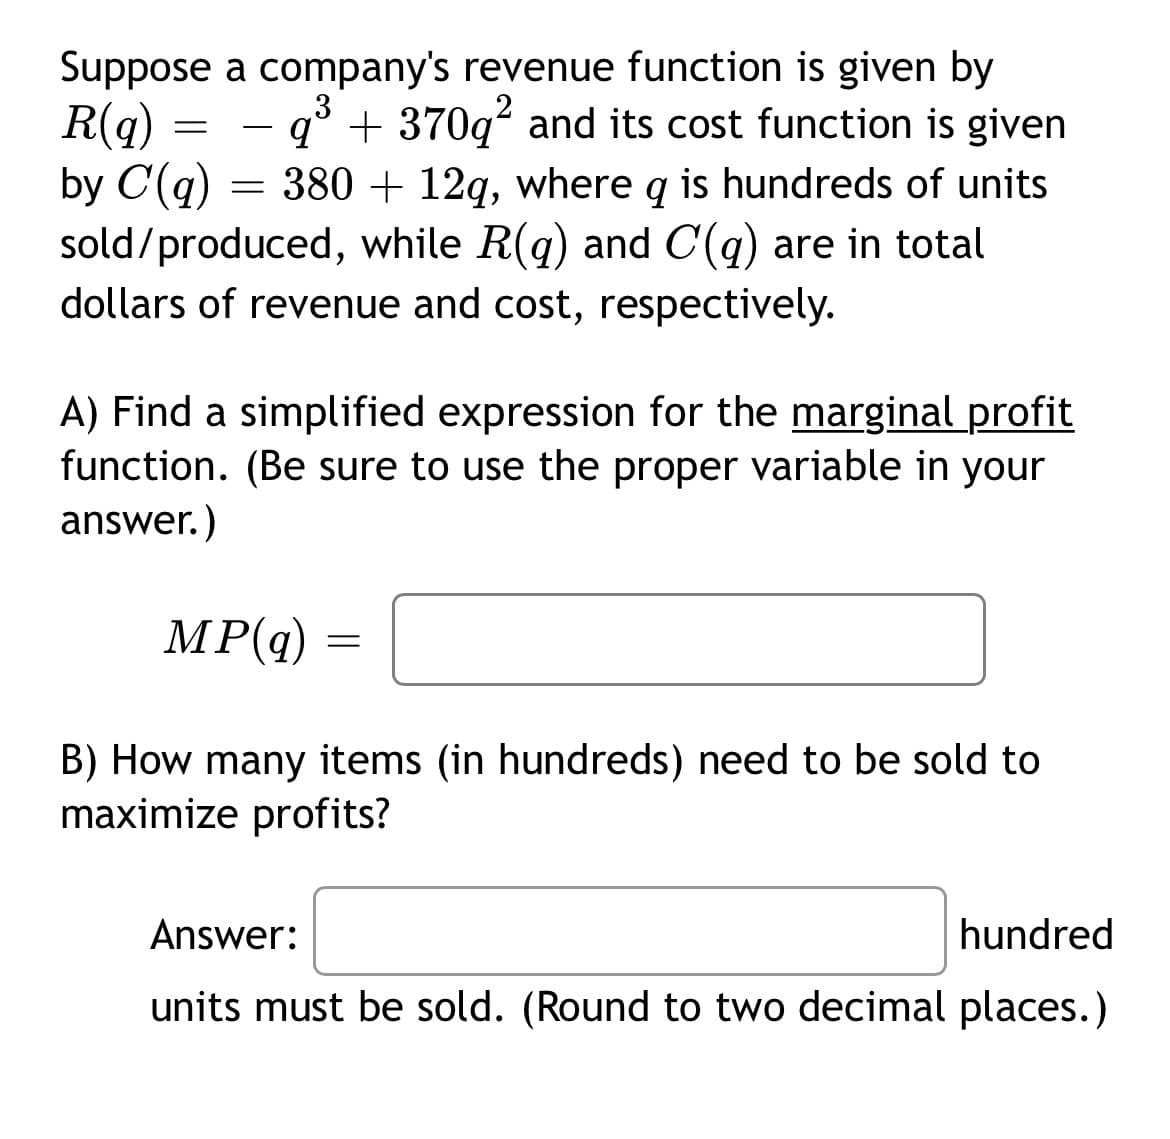 Suppose a company's revenue function is given by
q³+370q² and its cost function is given
2
R(q)
by C(q) = 380 + 12q, where q is hundreds of units
sold/produced, while R(q) and C(q) are in total
dollars of revenue and cost, respectively.
=
A) Find a simplified expression for the marginal profit
function. (Be sure to use the proper variable in your
answer.)
MP(q) =
=
B) How many items (in hundreds) need to be sold to
maximize profits?
Answer:
hundred
units must be sold. (Round to two decimal places.)